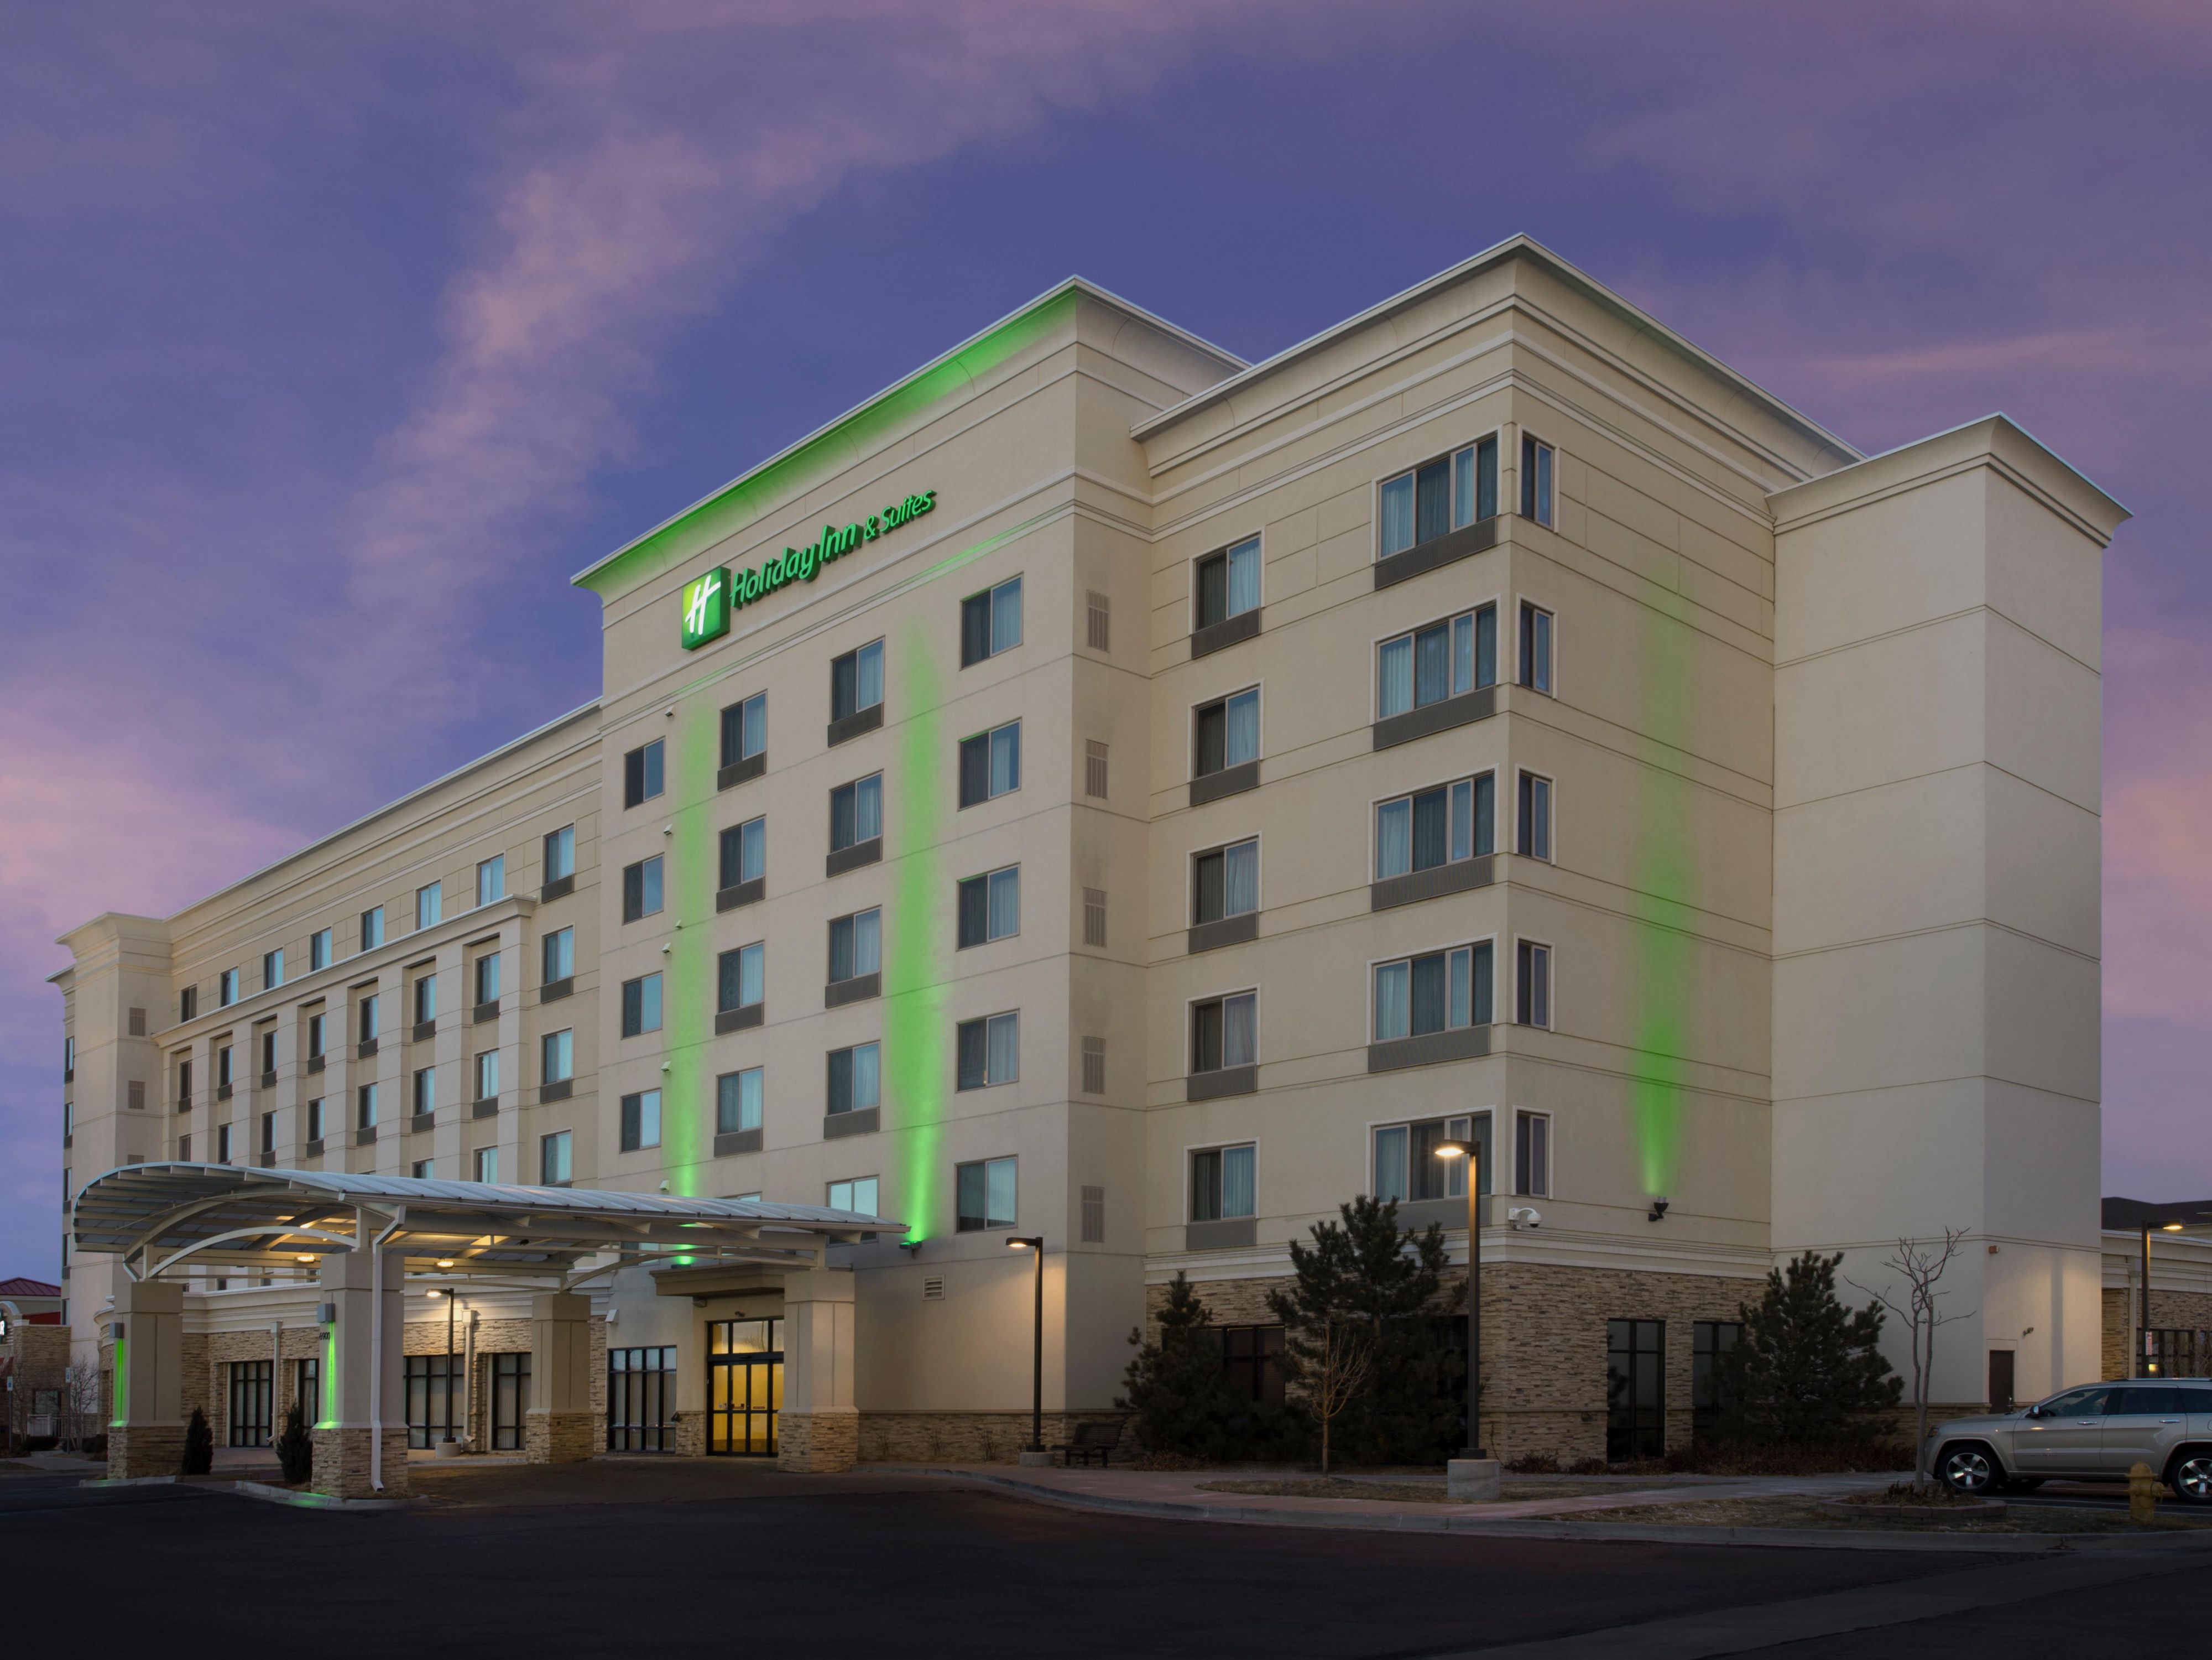 Holiday Inn Hotel And Suites Denver 5403784618 4x3